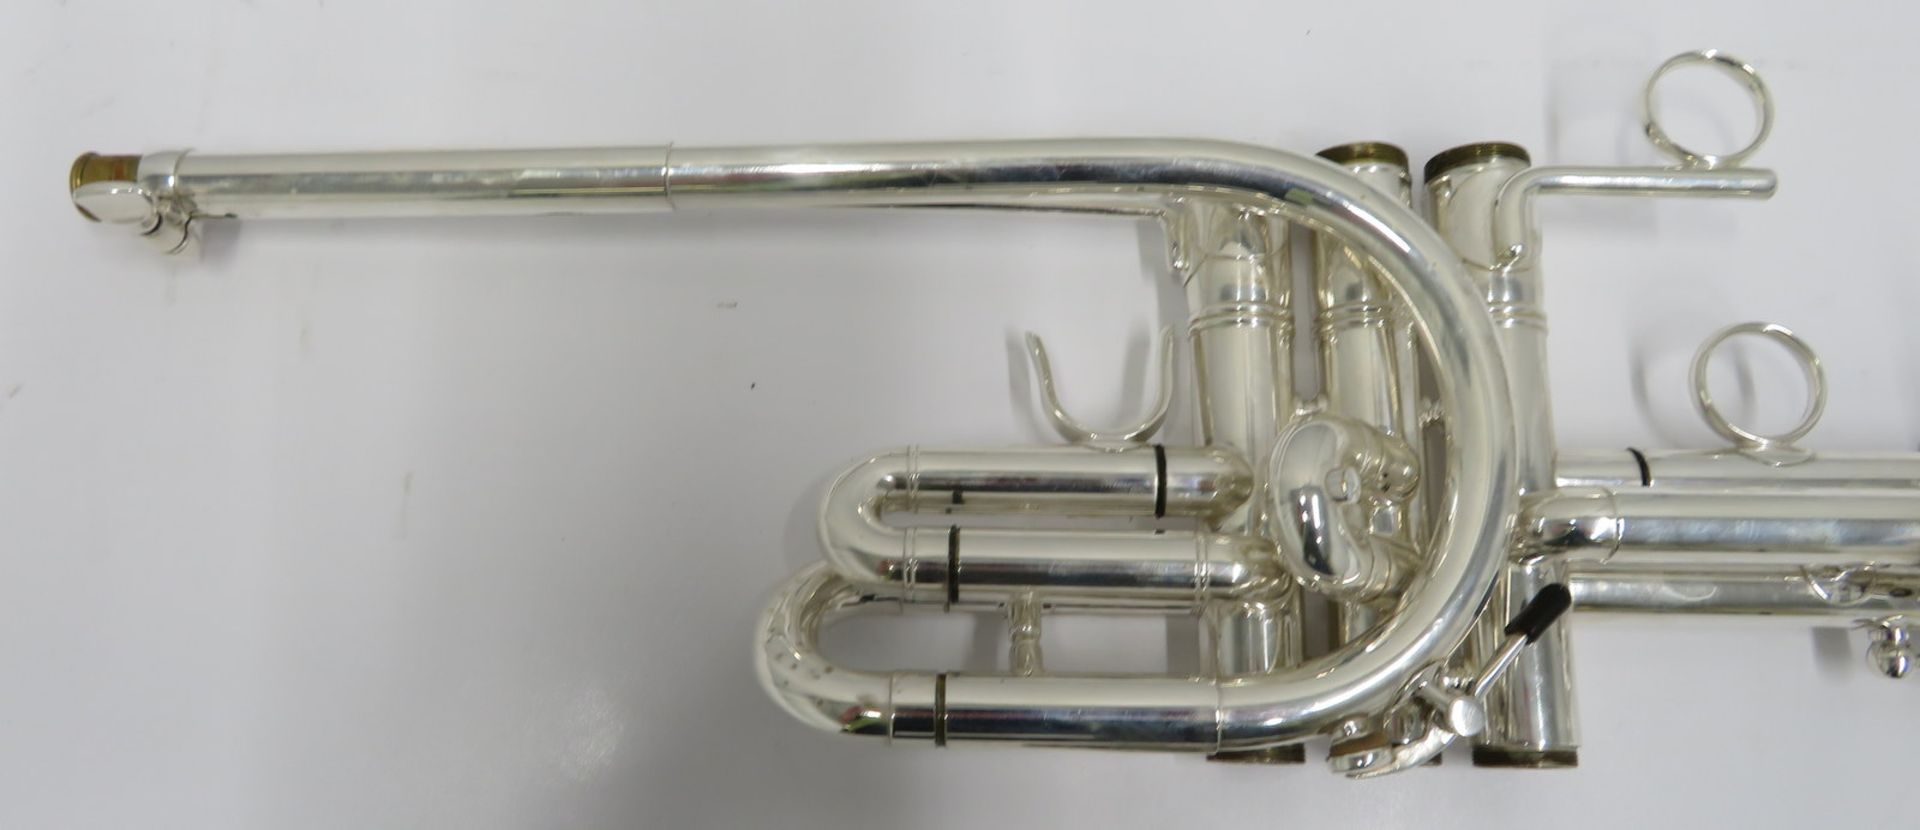 Smith-Watkins fanfare trumpet with case. Serial number: 768. - Image 14 of 16